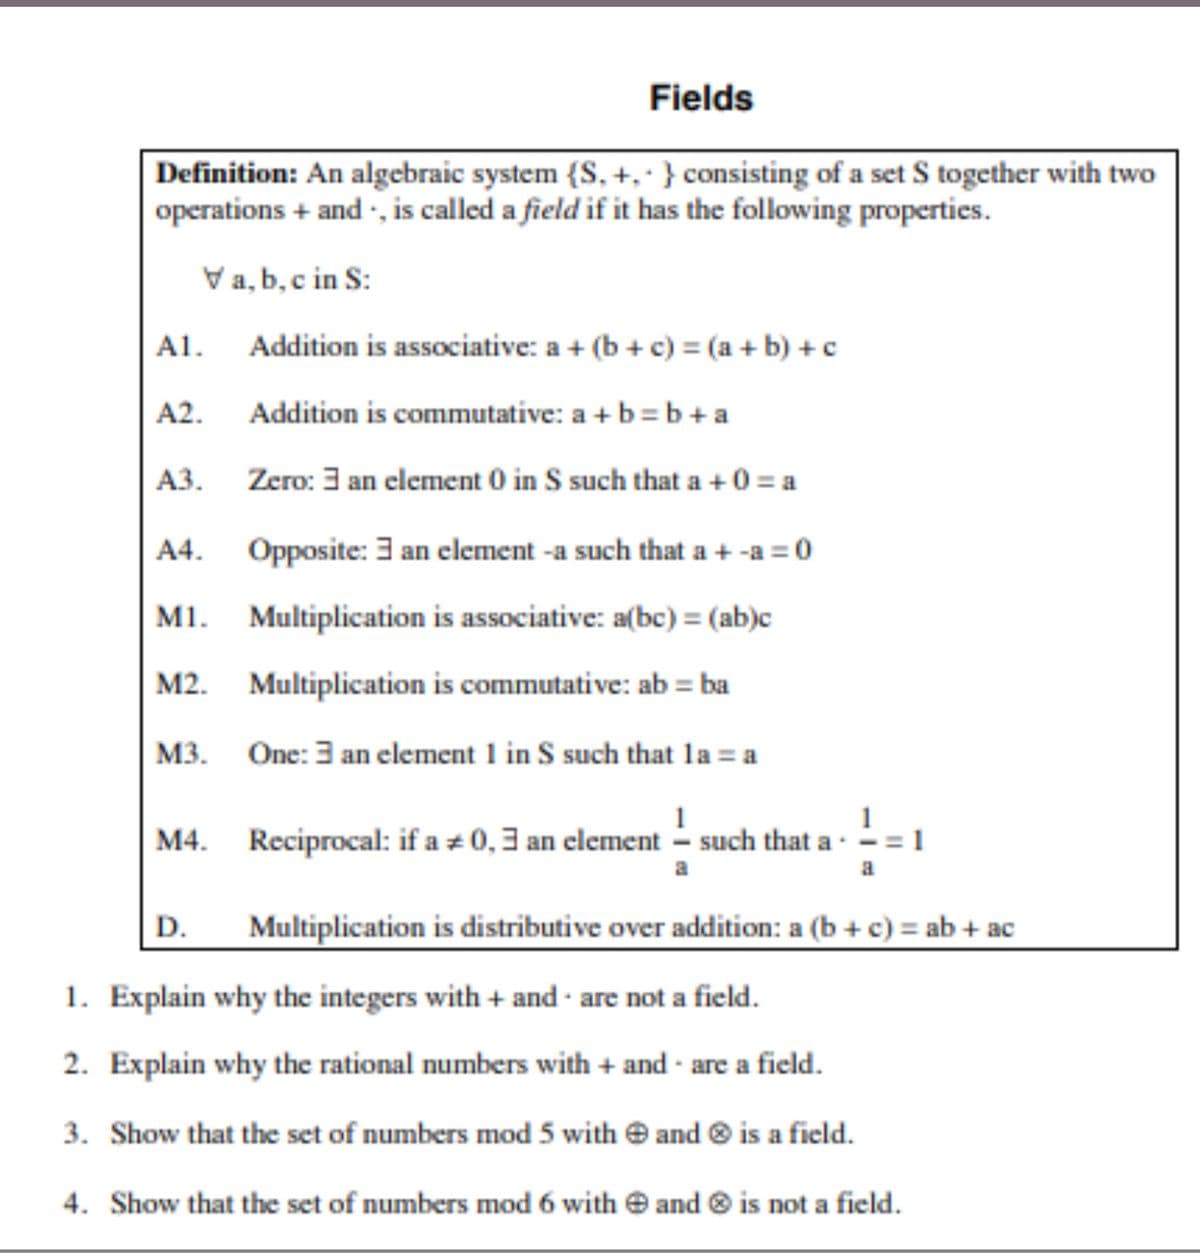 Fields
Definition: An algebraic system {S, +, ·} consisting of a set S together with two
operations + and , is called a field if it has the following properties.
Va, b, c in S:
A1. Addition is associative: a + (b + c) = (a + b) + c
A2.
Addition is commutative: a + b= b + a
АЗ.
Zero: 3 an element 0 in S such that a + 0 = a
A4.
Opposite: 3 an element -a such that a + -a = 0
M1. Multiplication is associative: a(bc) = (ab)c
M2. Multiplication is commutative: ab = ba
M3. One: 3 an element 1 in S such that la = a
1
M4. Reciprocal: if a z 0,3 an clement - such that a-
D.
Multiplication is distributive over addition: a (b + c) = ab + ac
1. Explain why the integers with + and · are not a field.
2. Explain why the rational numbers with + and are a field.
3. Show that the set of numbers mod 5 with e and ® is a field.
4. Show that the set of numbers mod 6 with e and ® is not a field.
